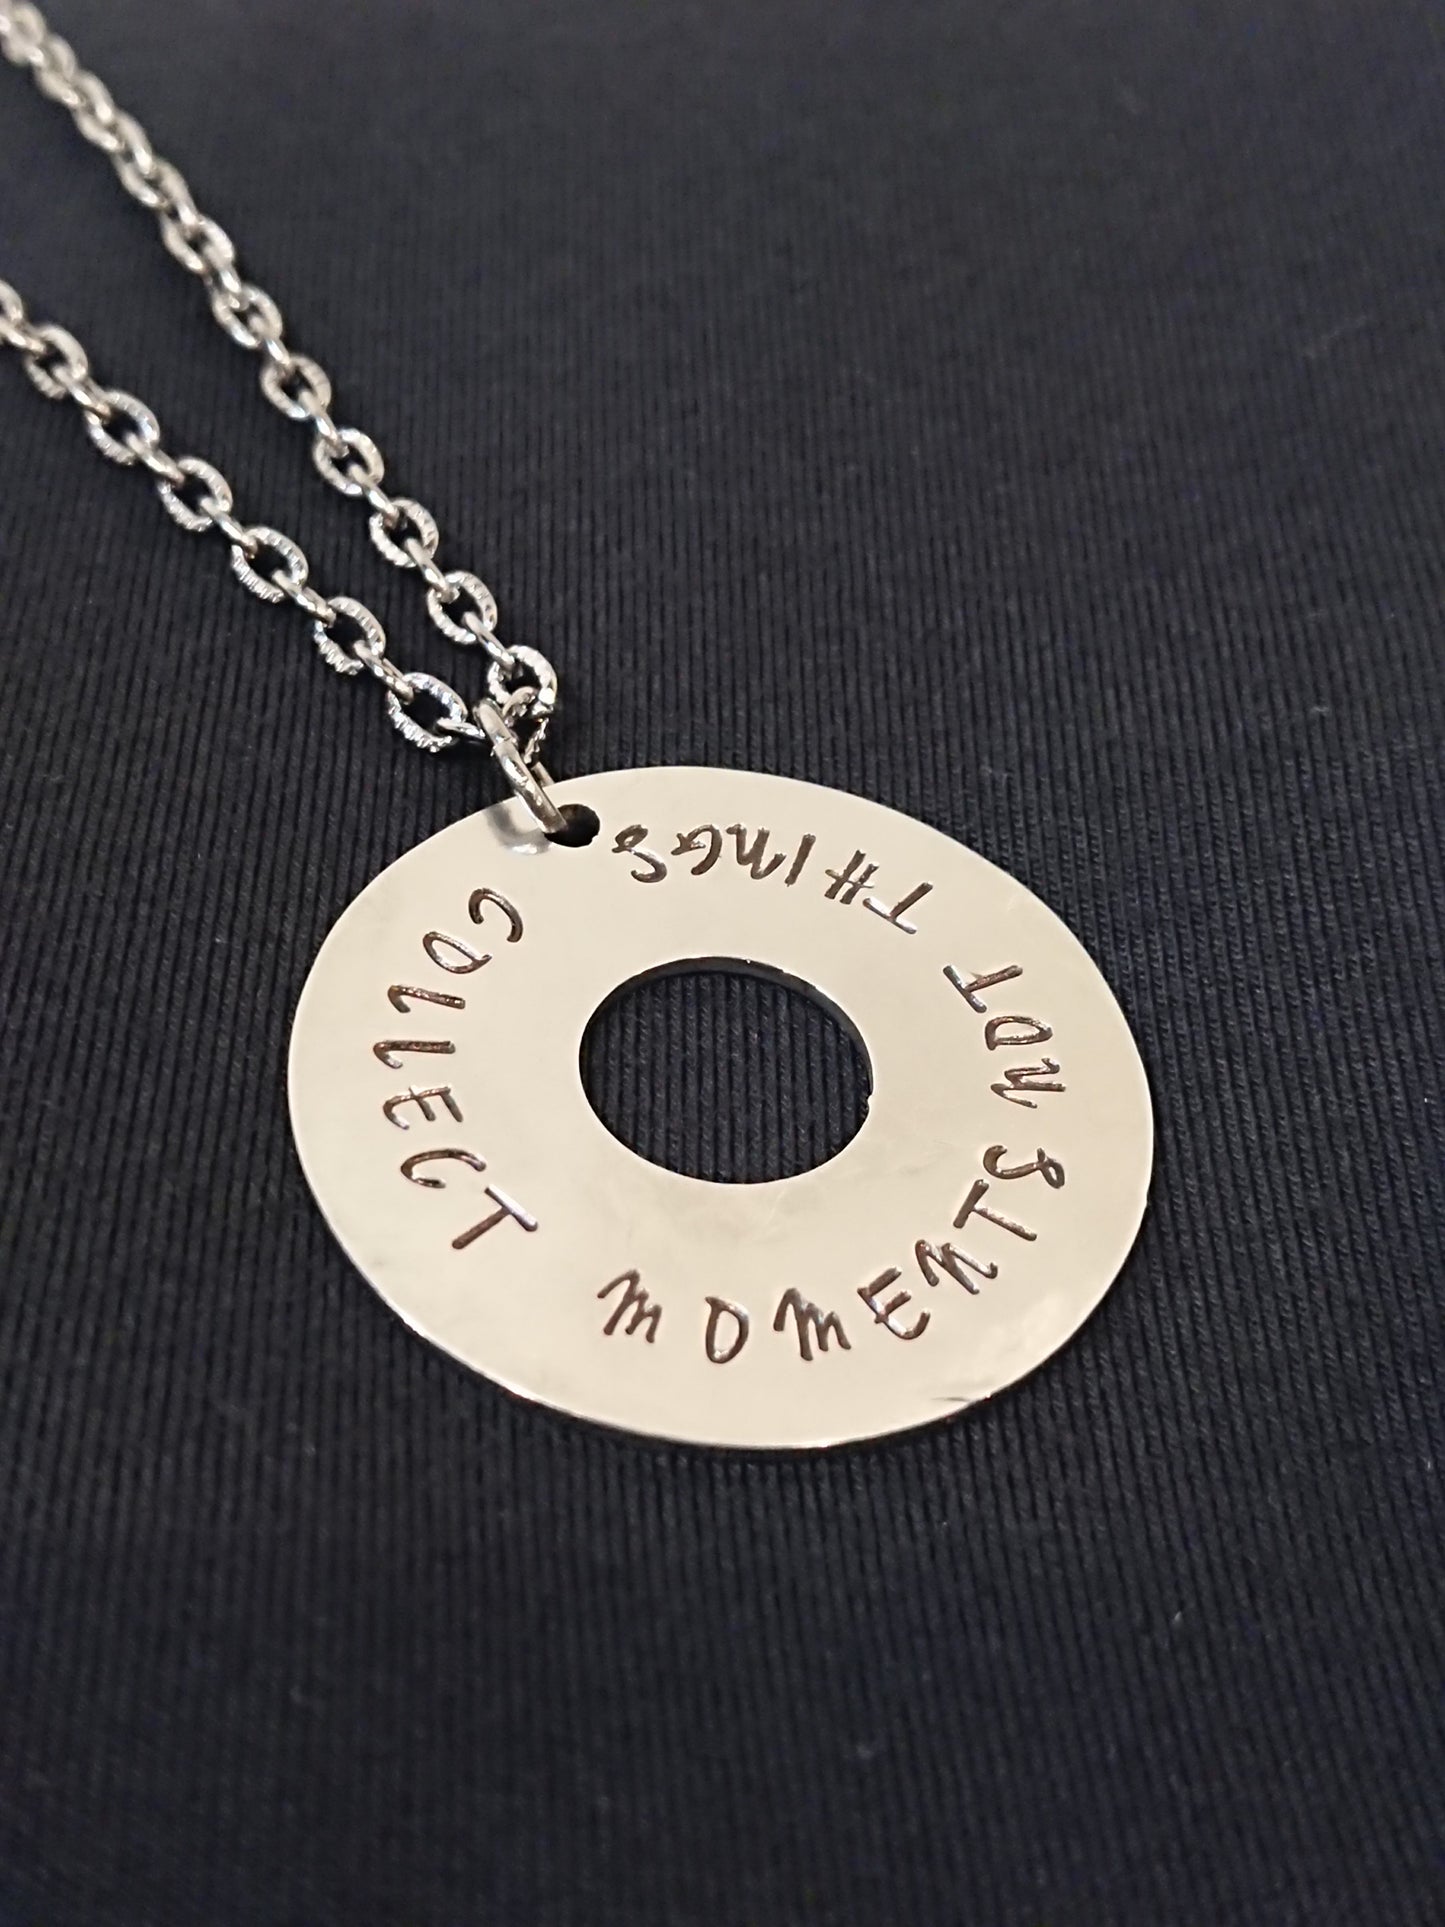 Ninestyles - Collect Moments Not Things Necklace (Ring)